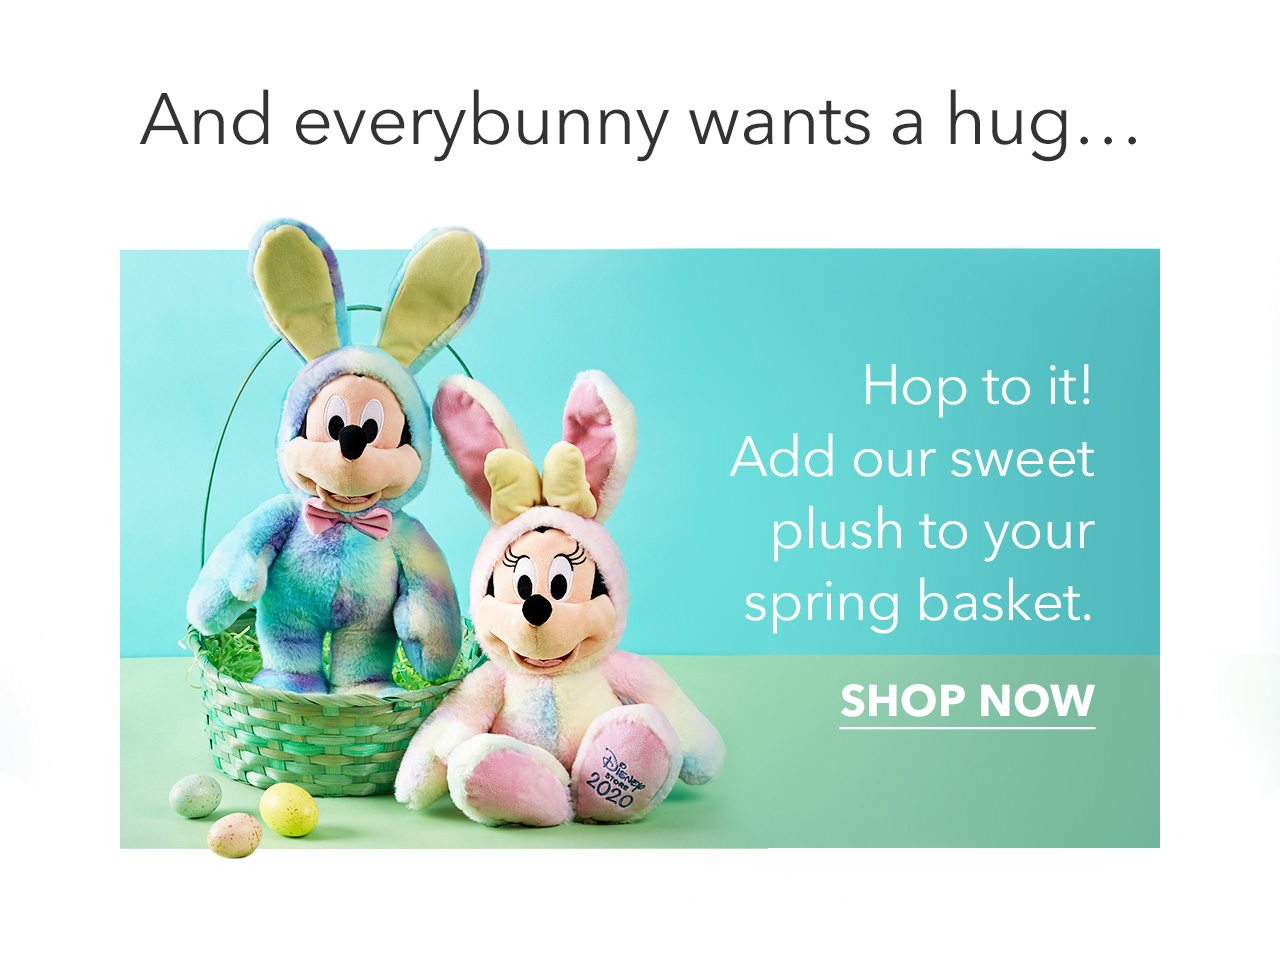 Hop to it! Add our sweet plush to your spring basket | Shop Now